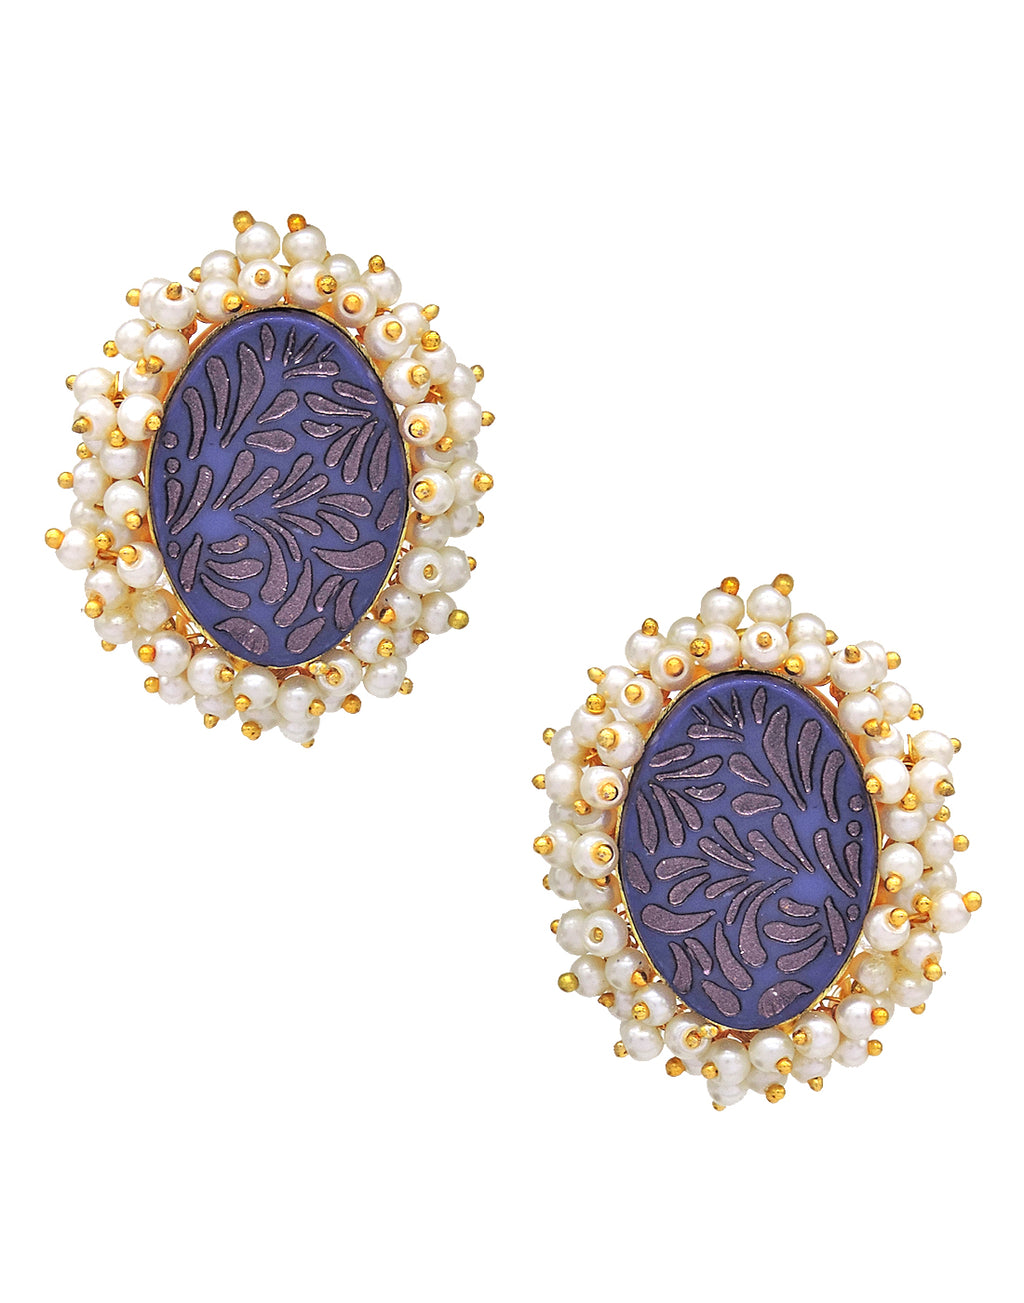 Oval Bloom Earrings - Statement Earrings - Gold-Plated & Hypoallergenic - Made in India - Dubai Jewellery - Dori